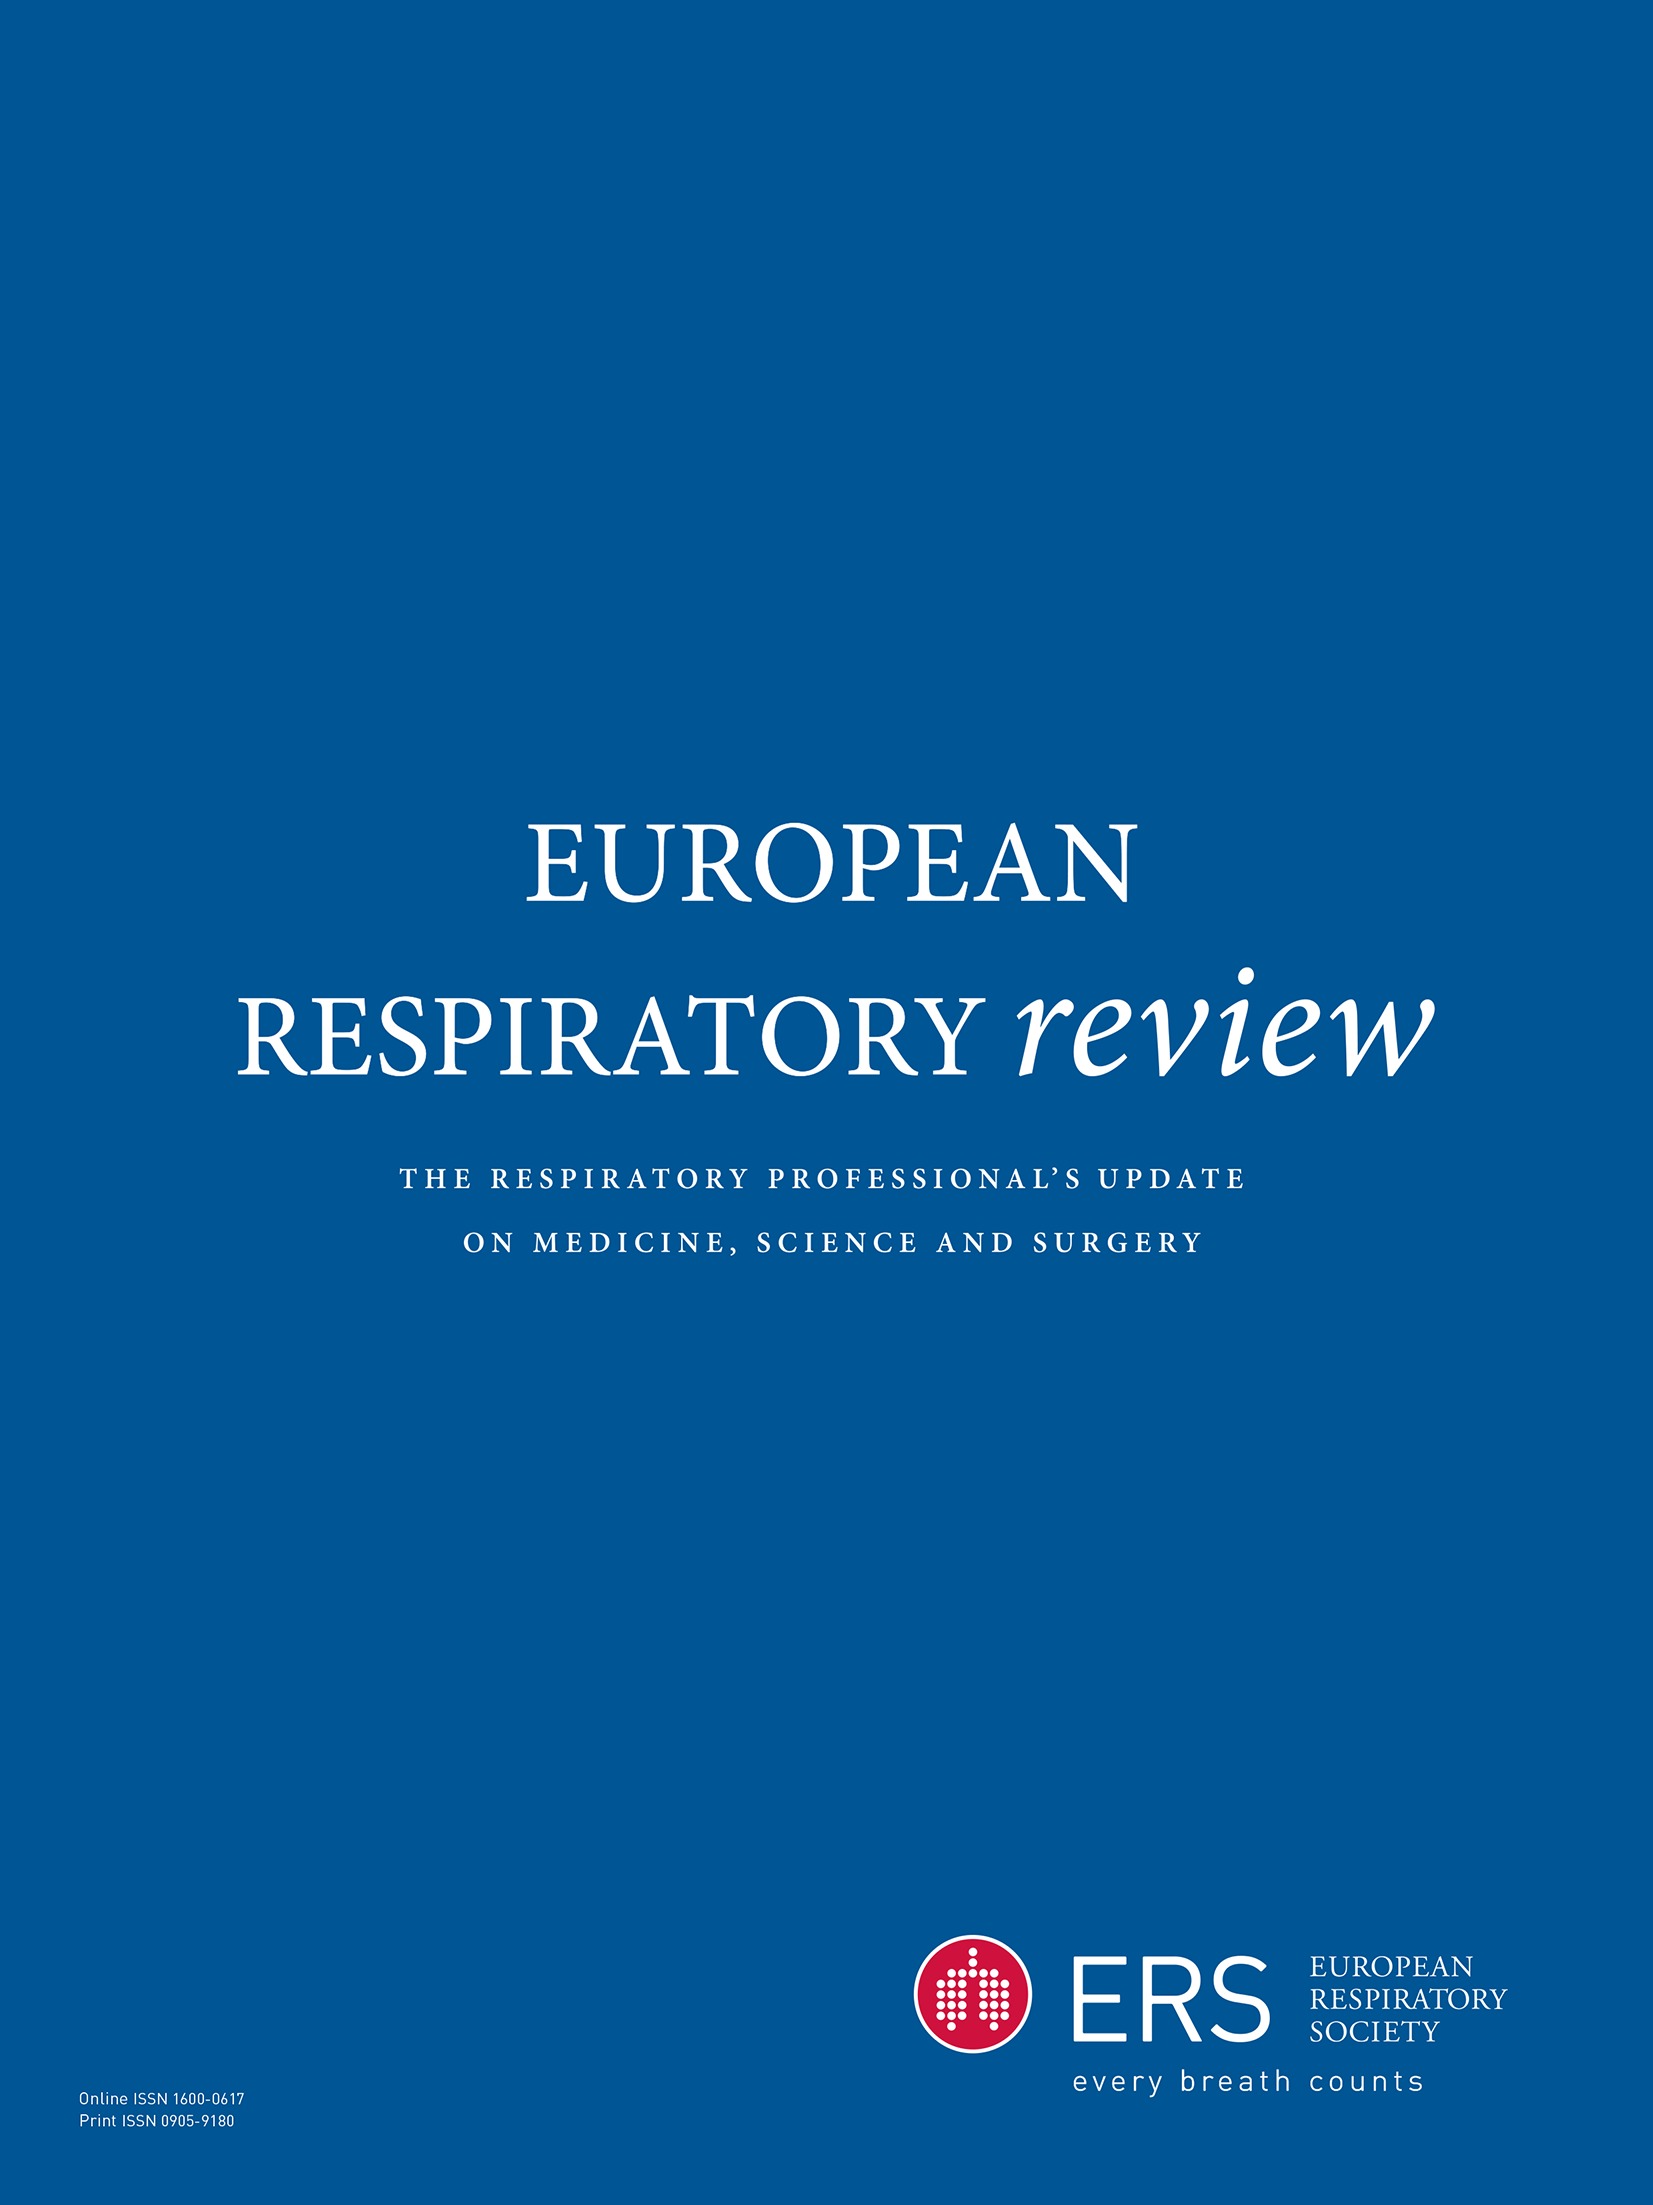 Systematic review of ceftaroline fosamil in the management of patients with methicillin-resistant Staphylococcus aureus pneumonia